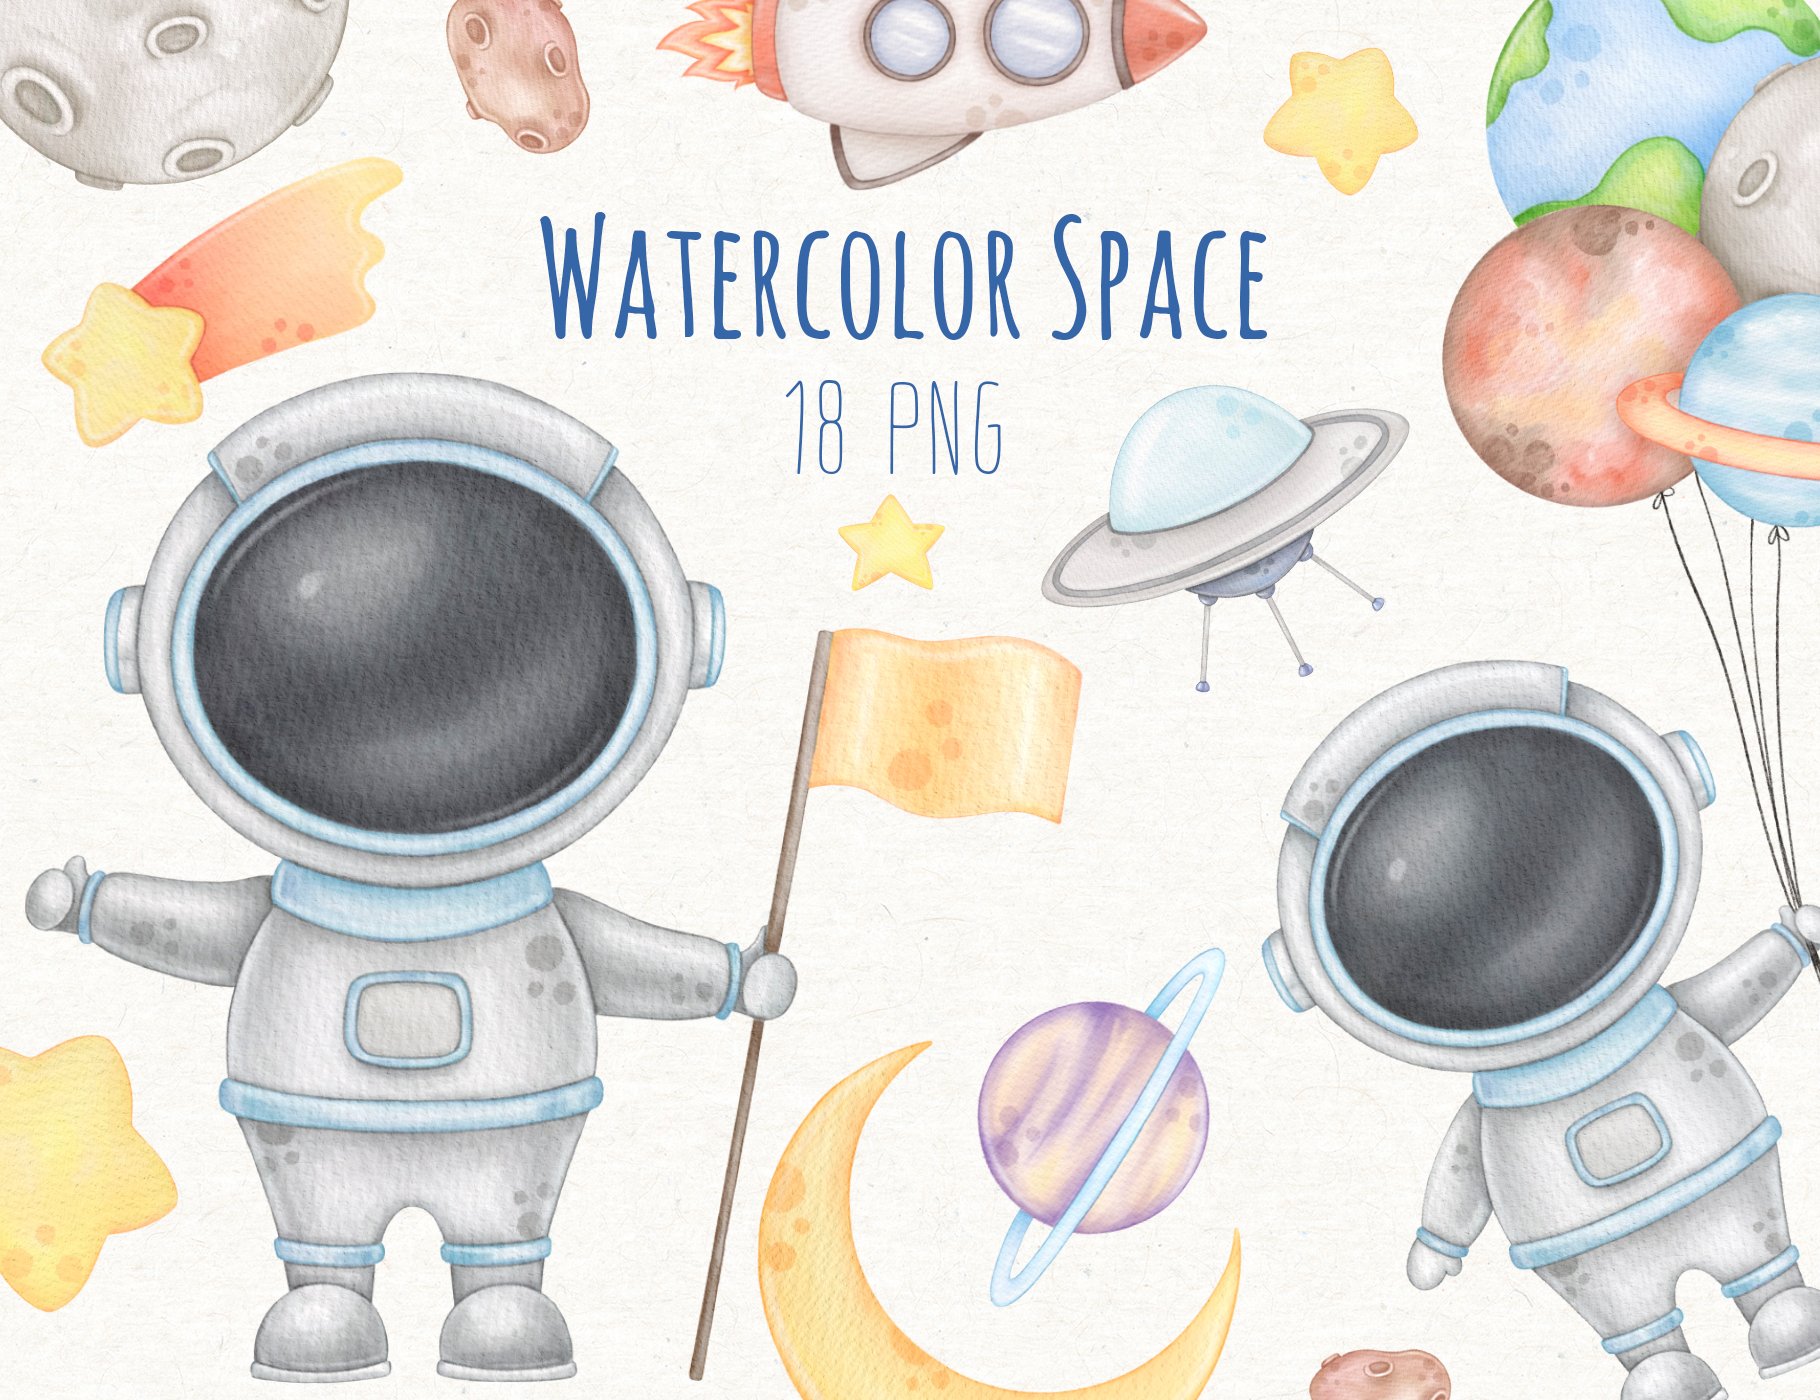 Astronaut & Space Watercolor Clipart cover image.